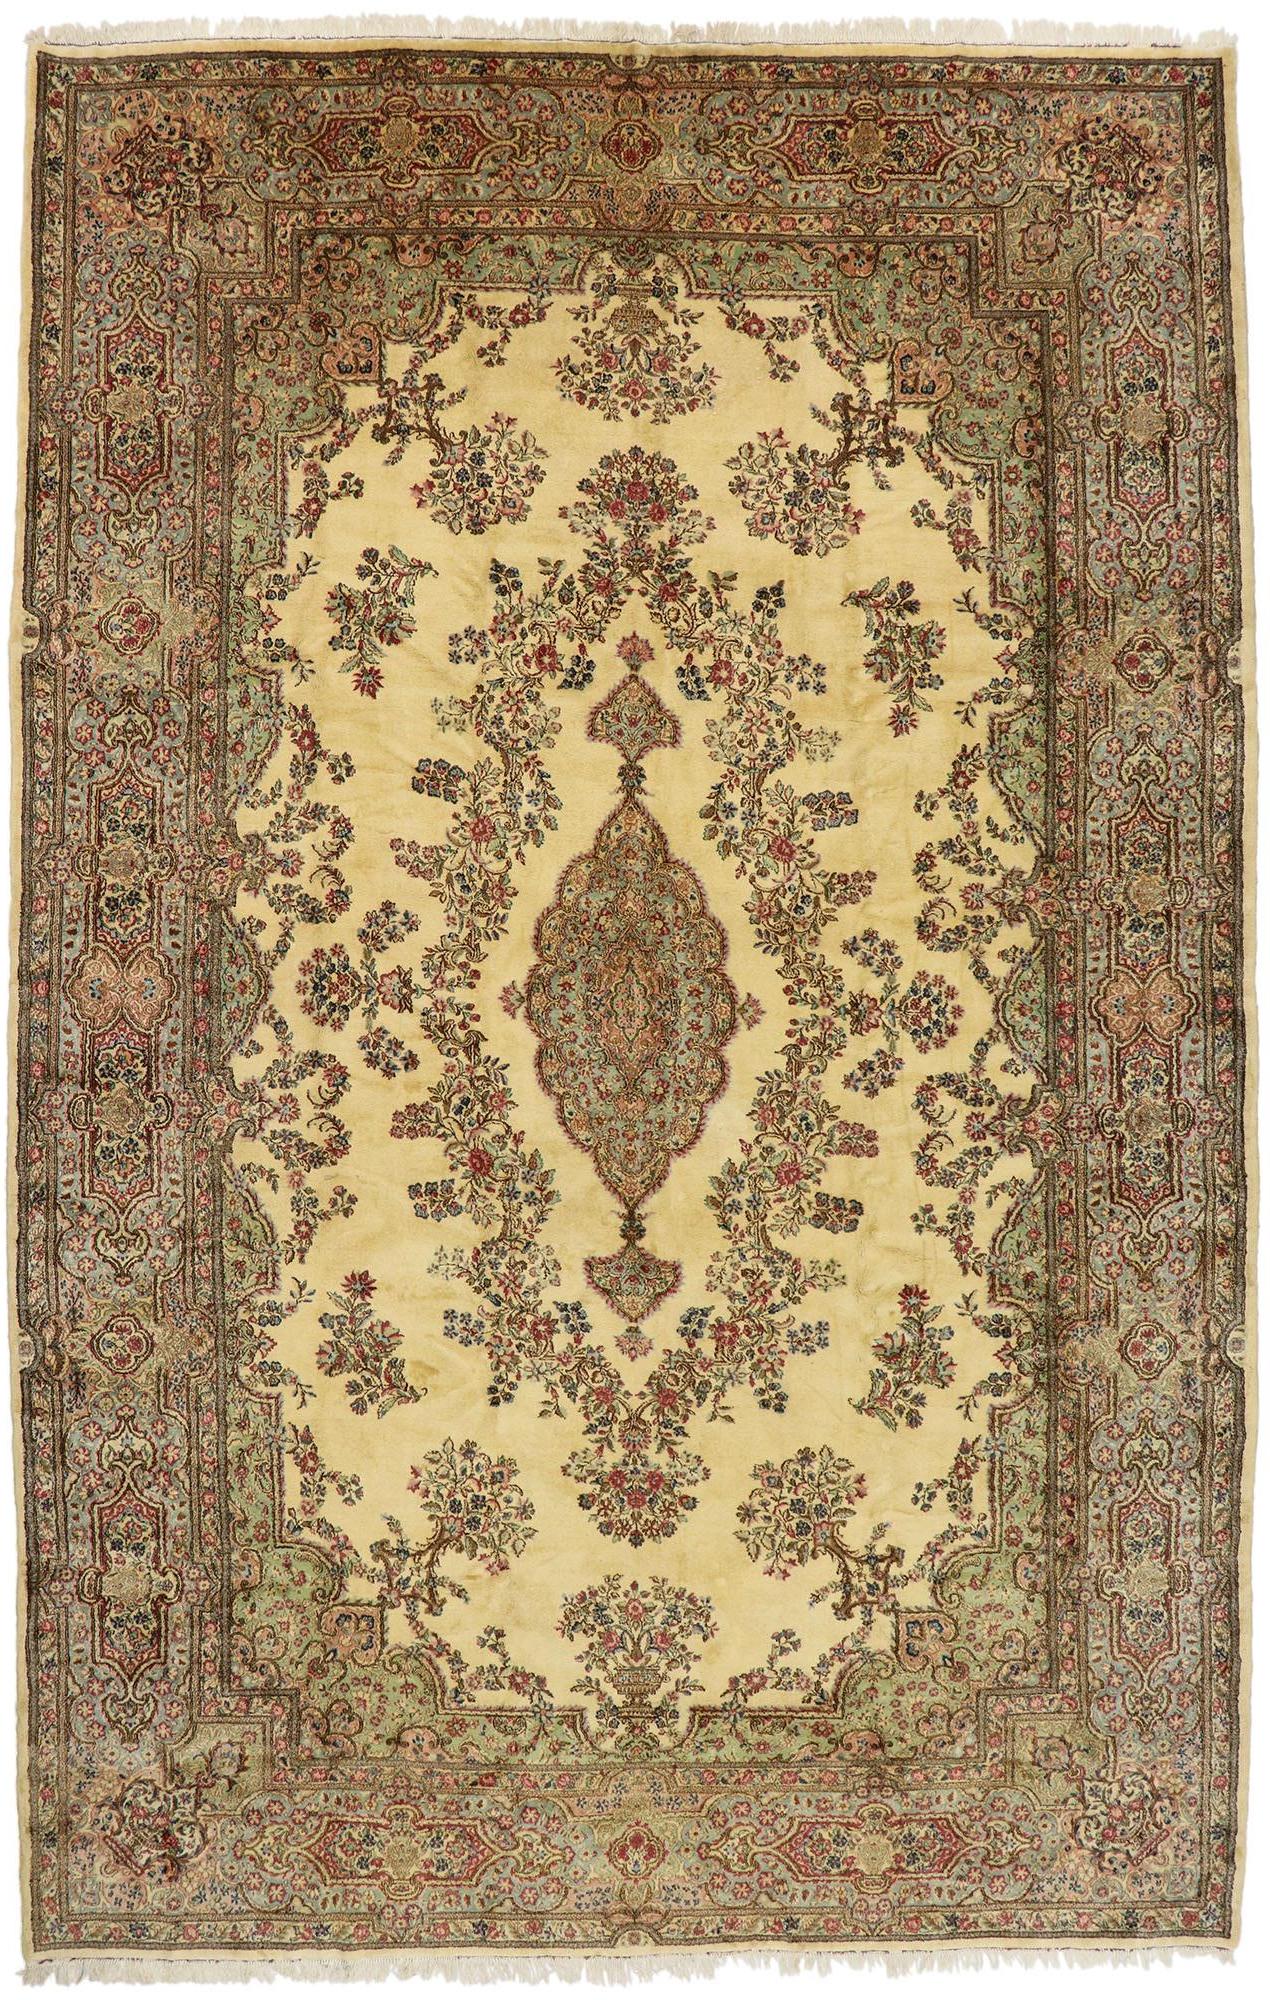 77168 Oversized Antique Persian Kerman Rug,11'06 x 17'10. 
Prepare to be swept off your feet by the dazzling allure of this oversized antique Kerman rug – a masterpiece that practically screams, 